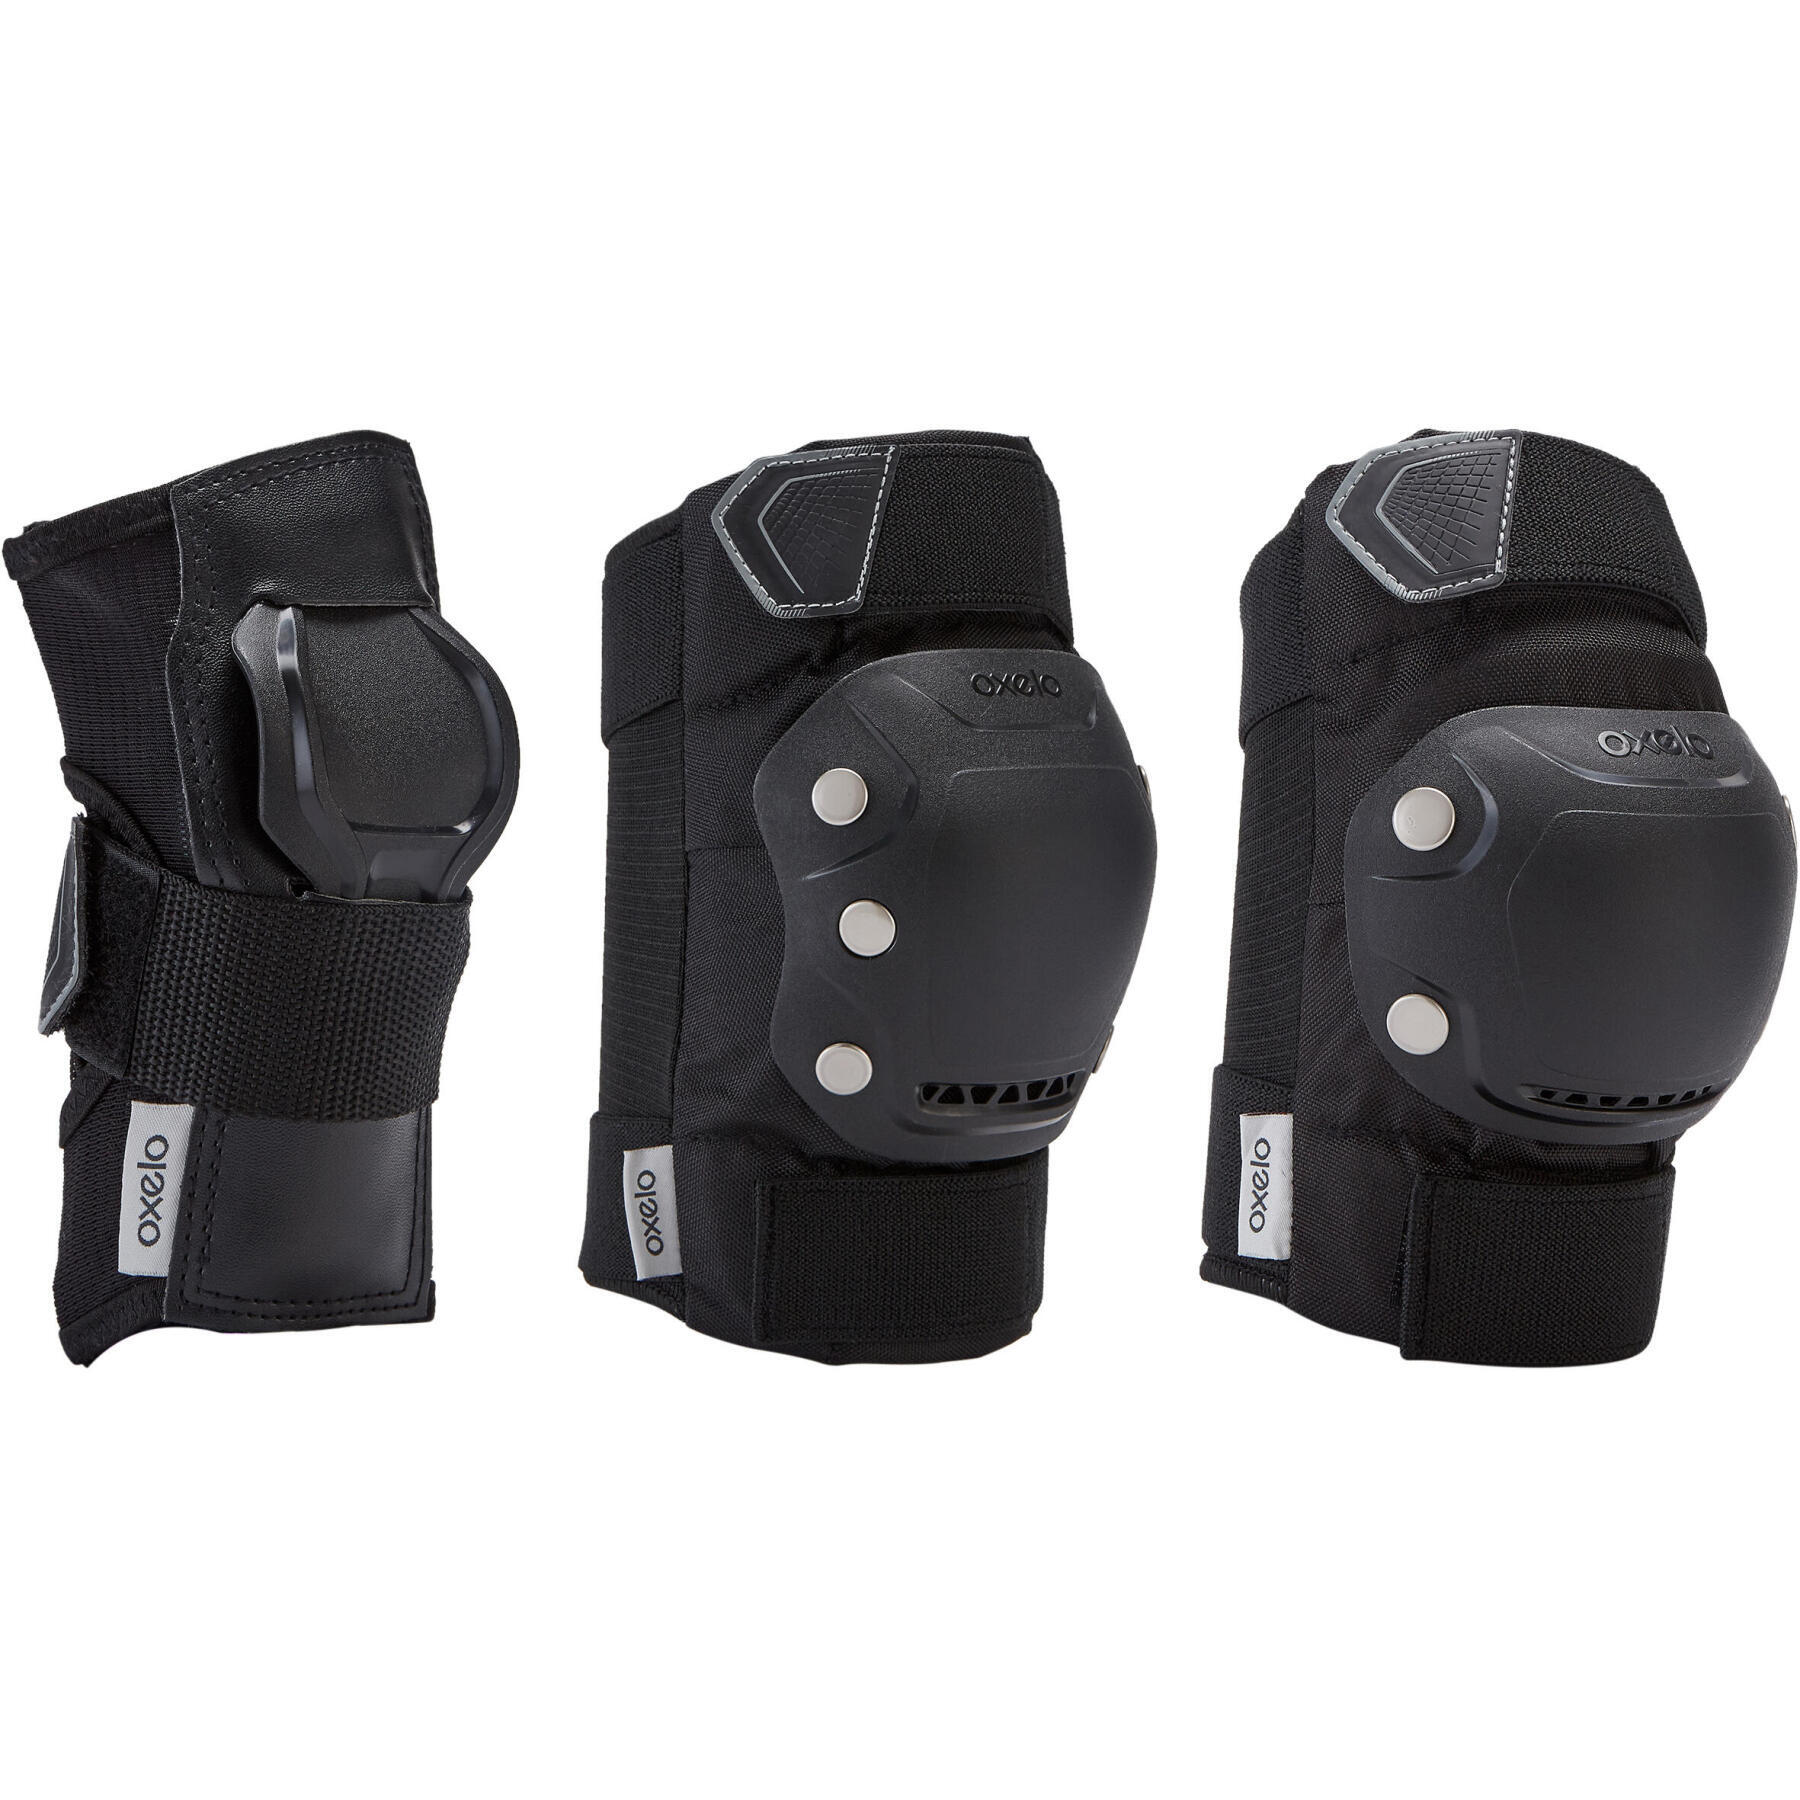 SET OF 3 PROTECTIONS FIT 500